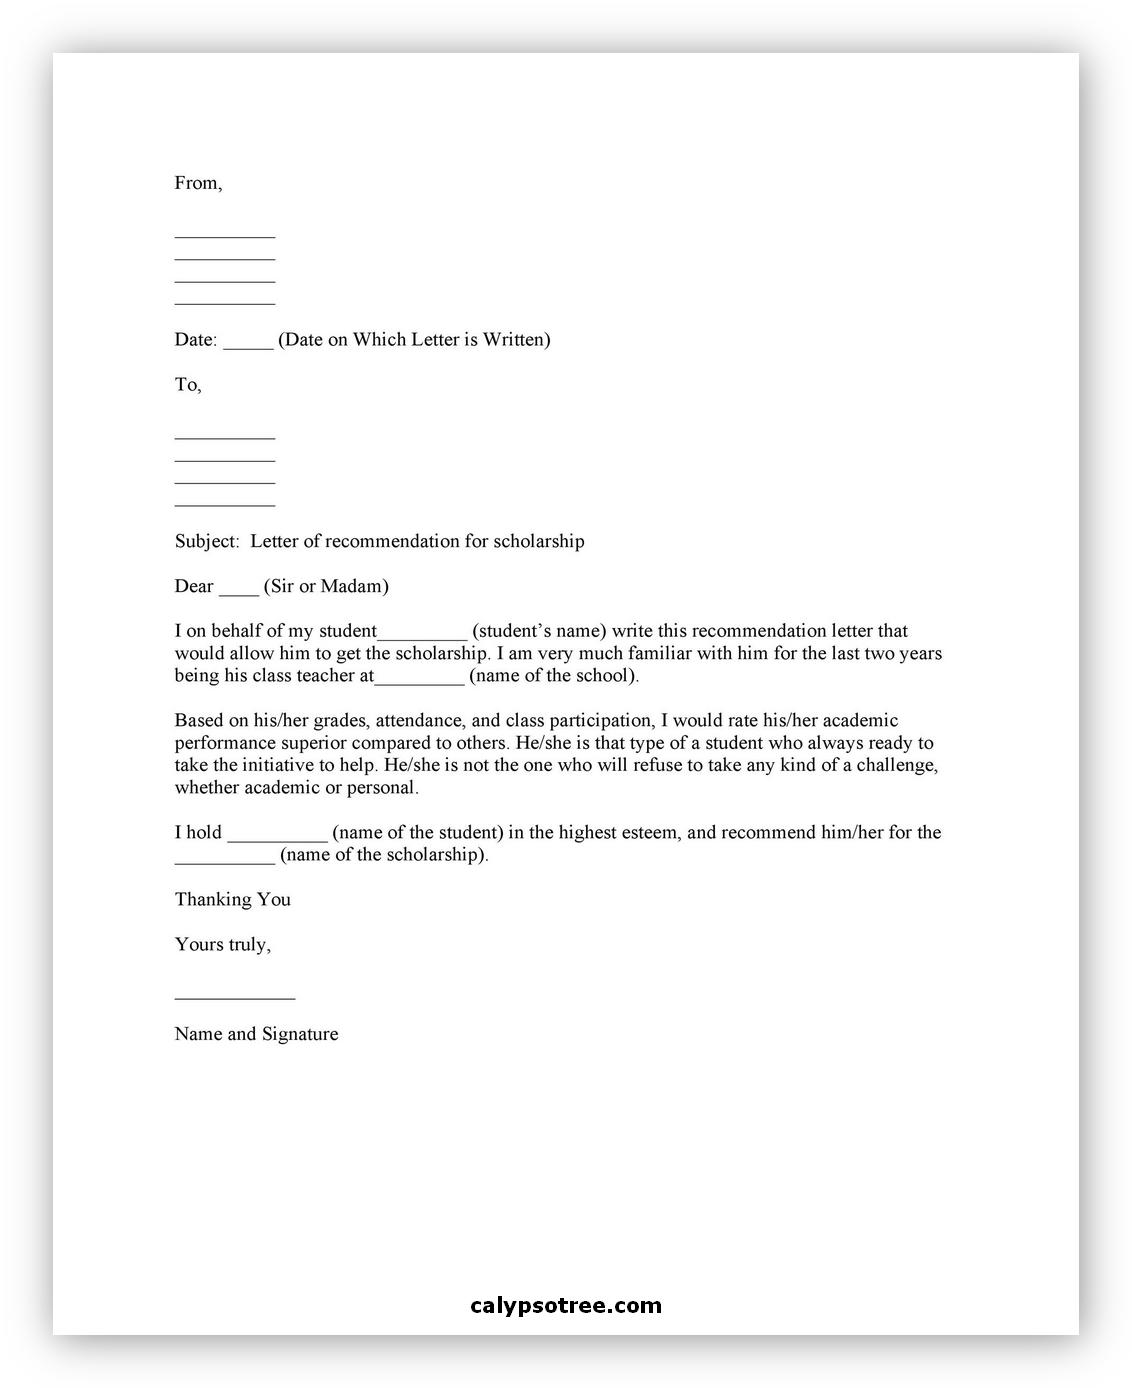 Letter of Recommendation Format 08